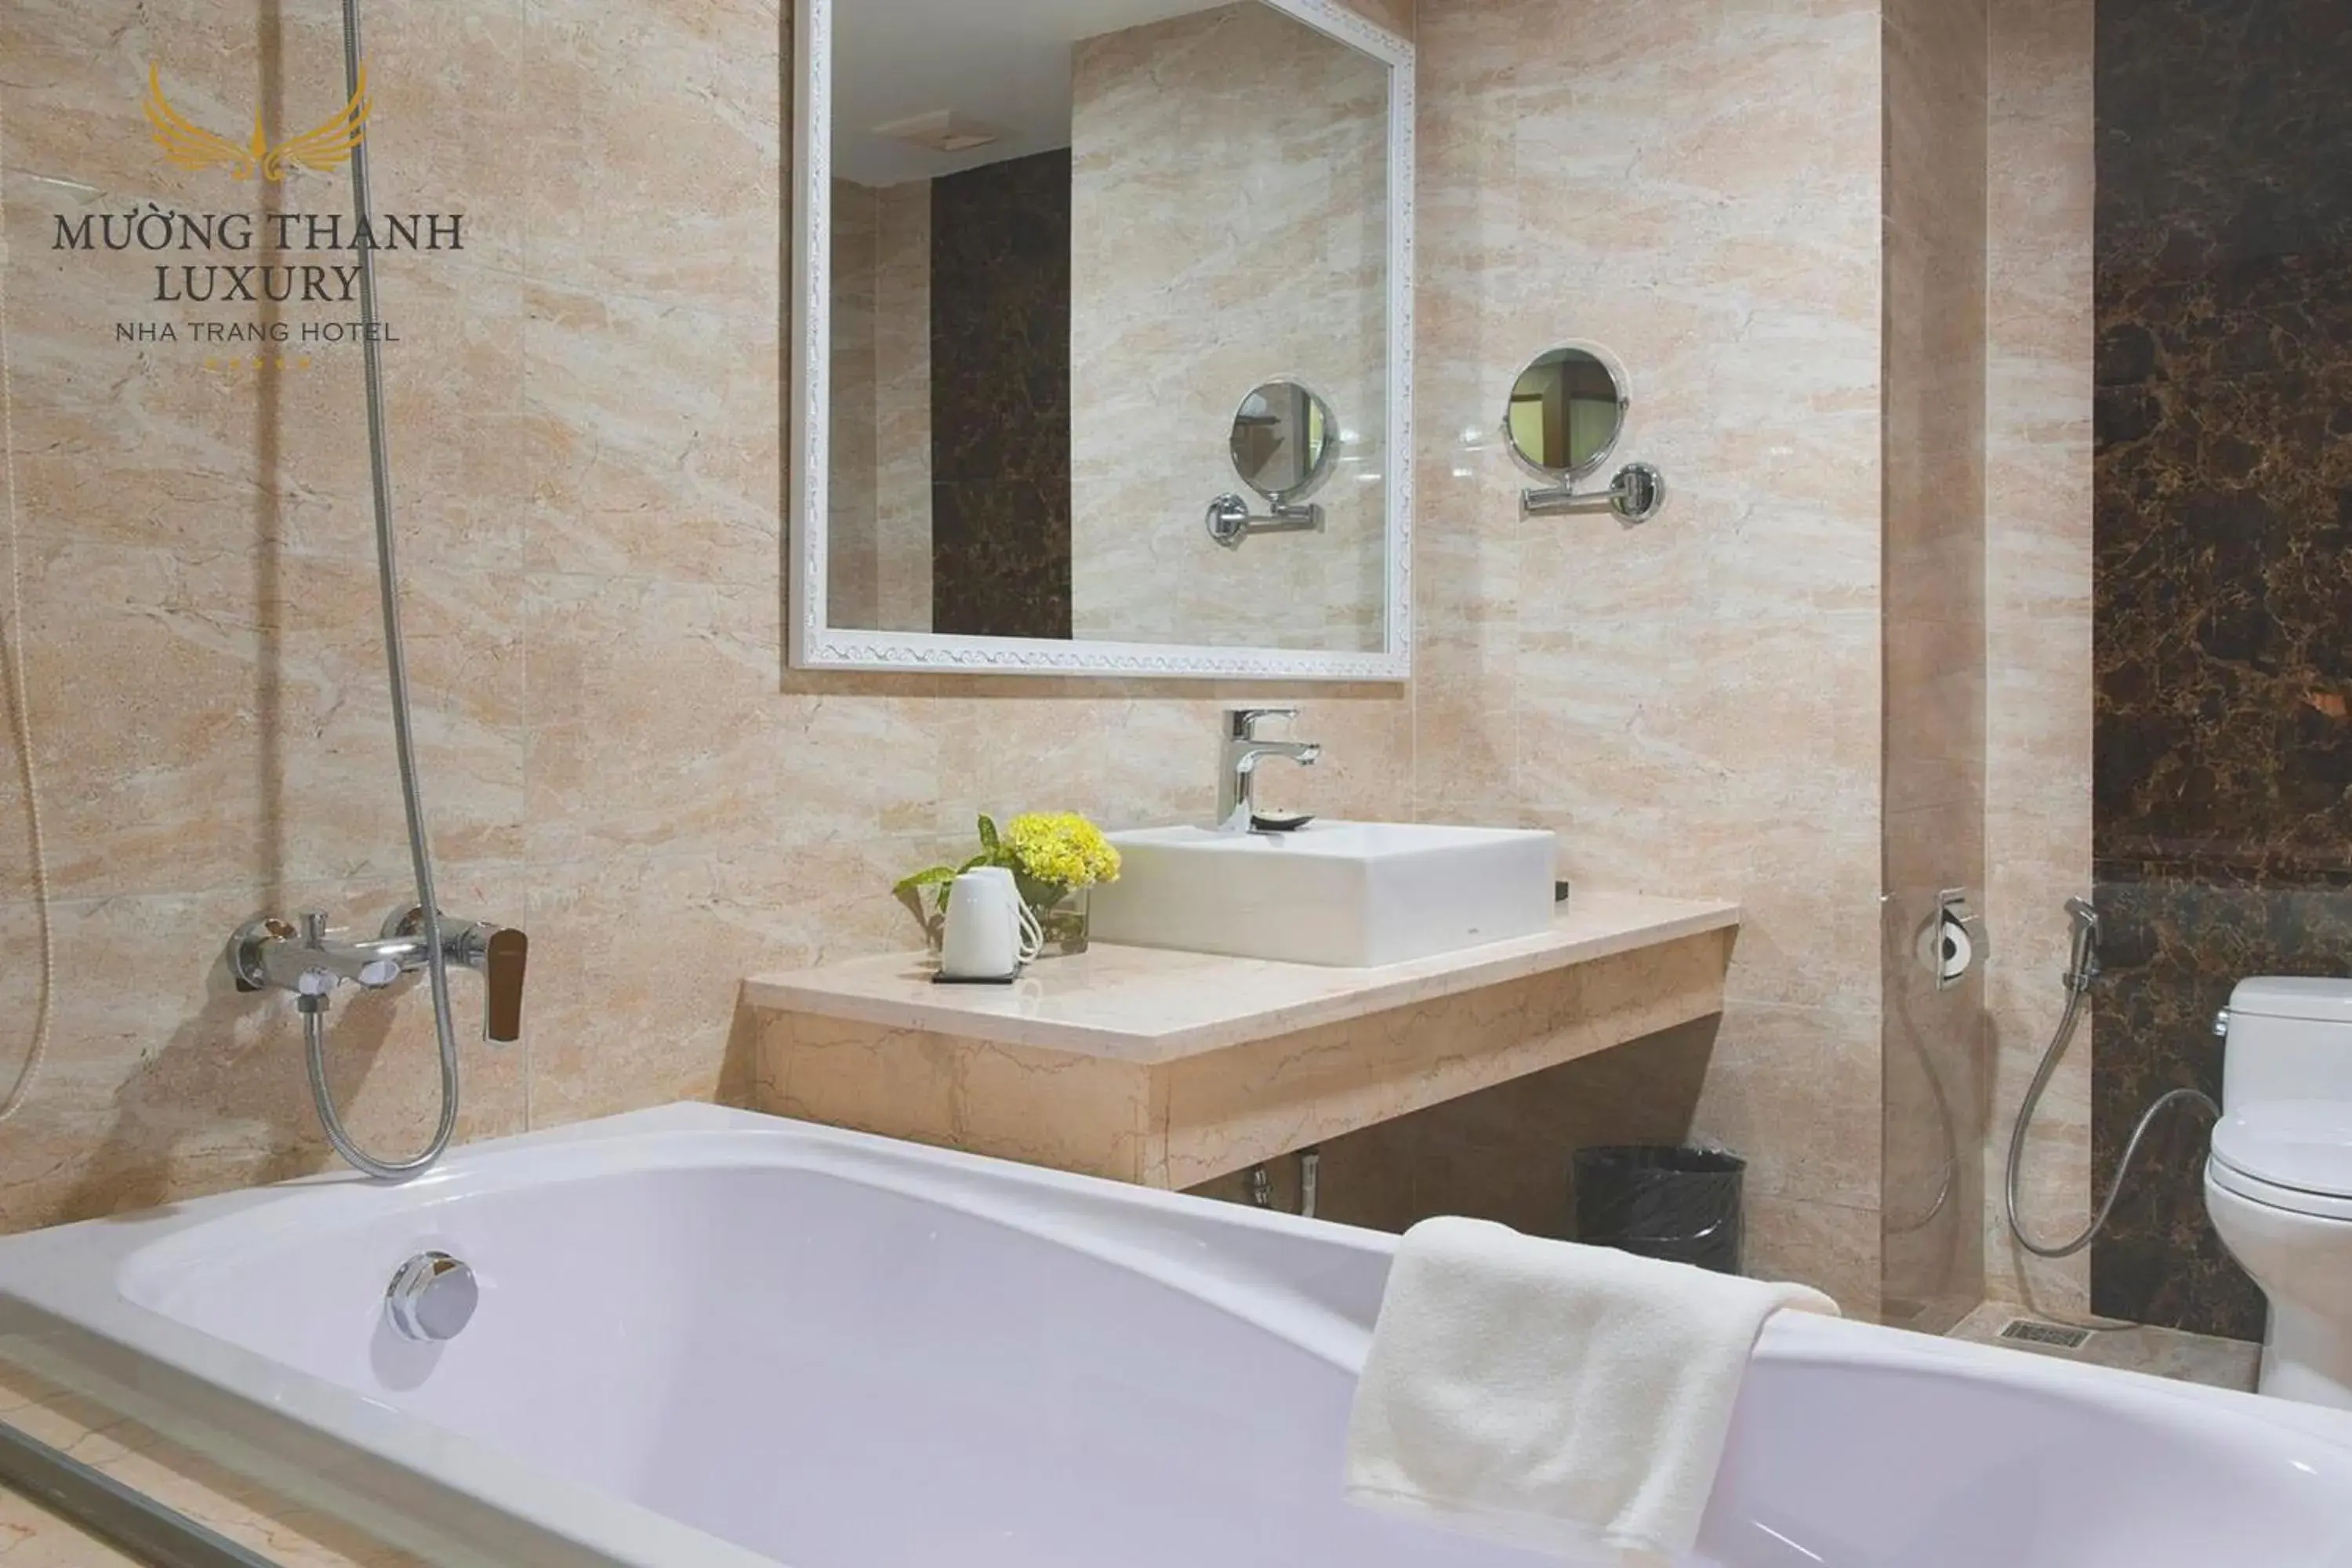 Toilet, Bathroom in Muong Thanh Luxury Nha Trang Hotel